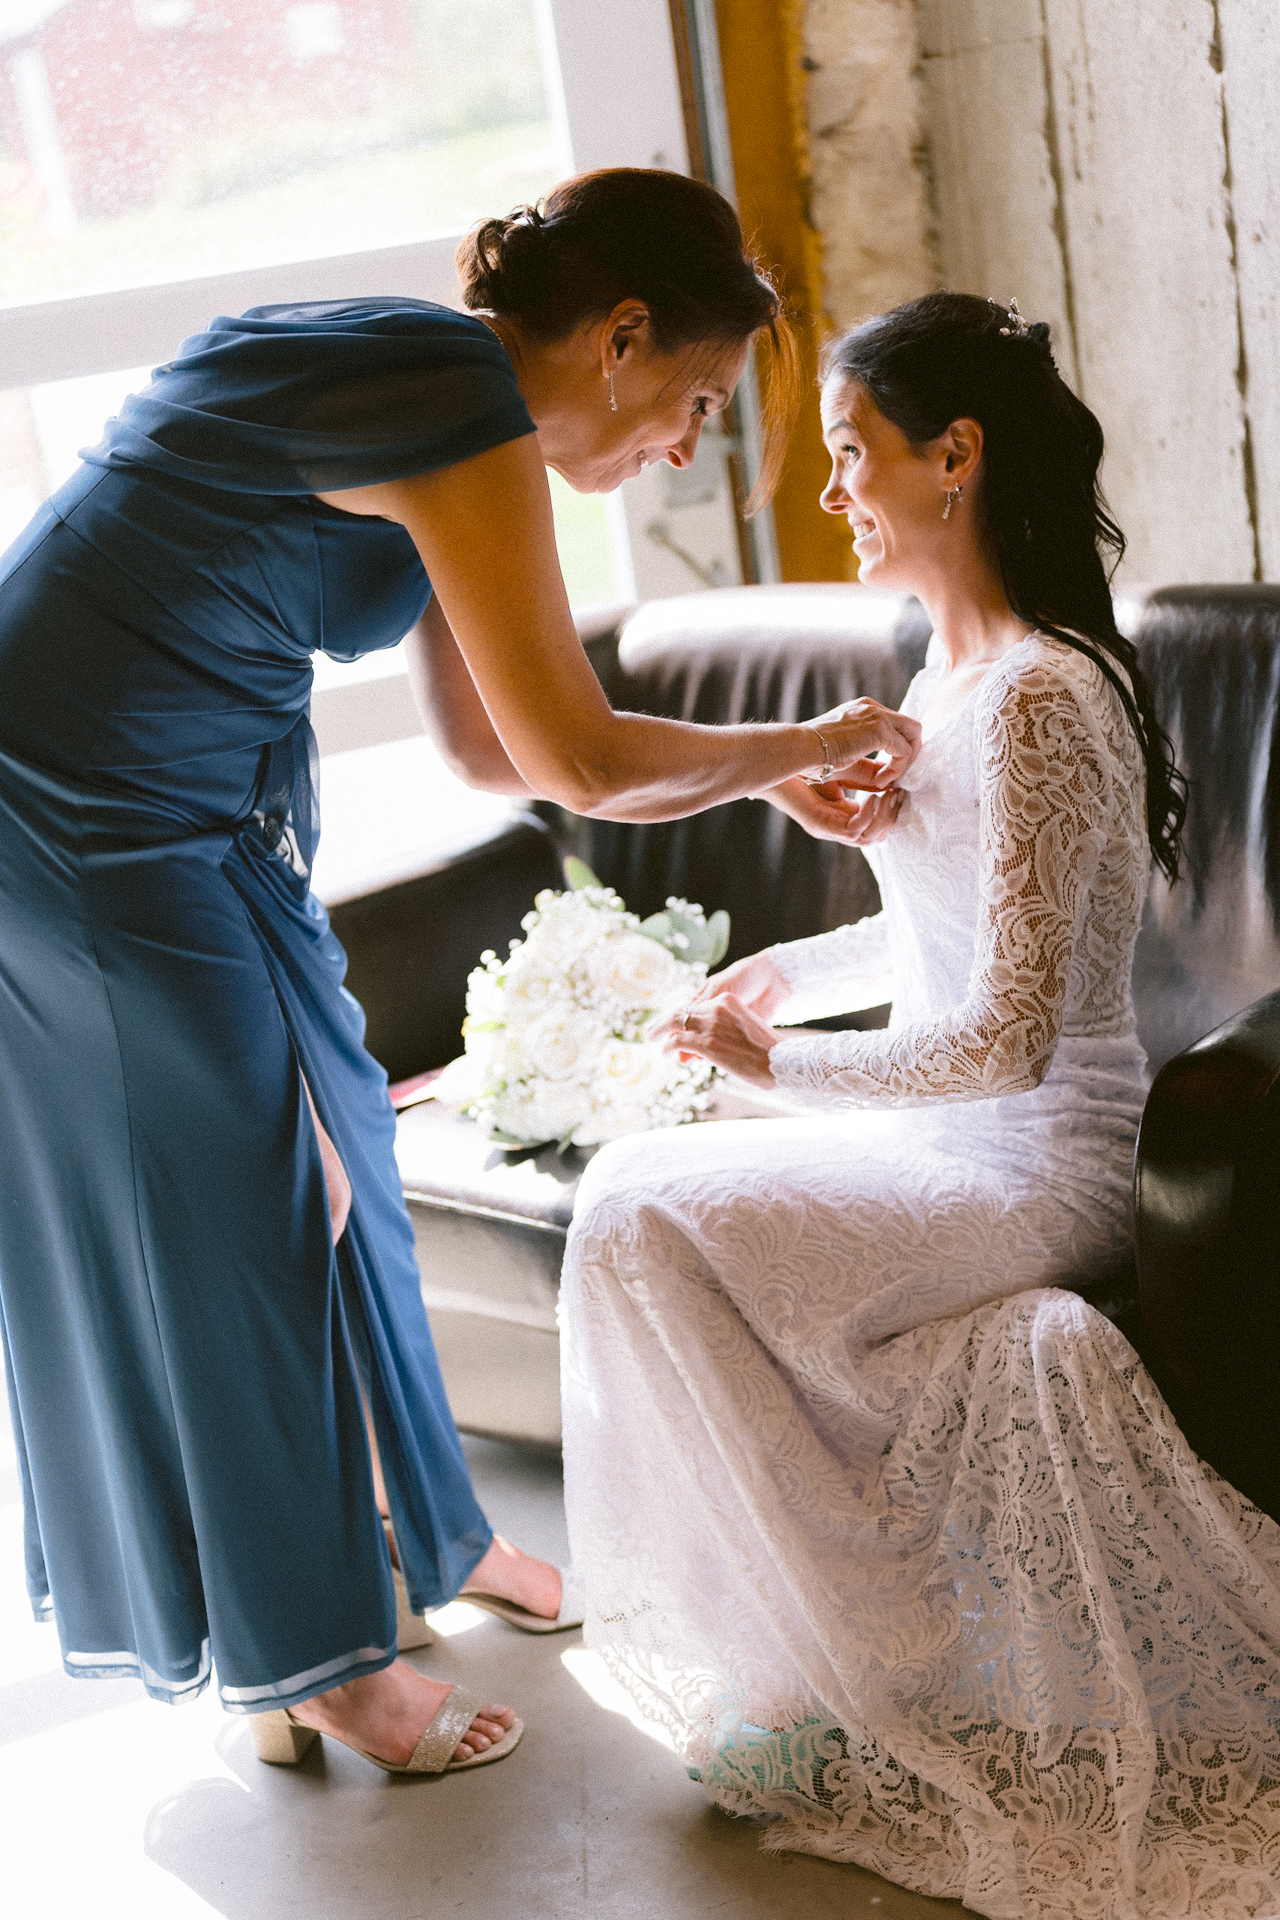 A woman in a blue dress adjusts the veil of a bride seated in a chair, both are indoors by a large window, with a bouquet on the table next to them.